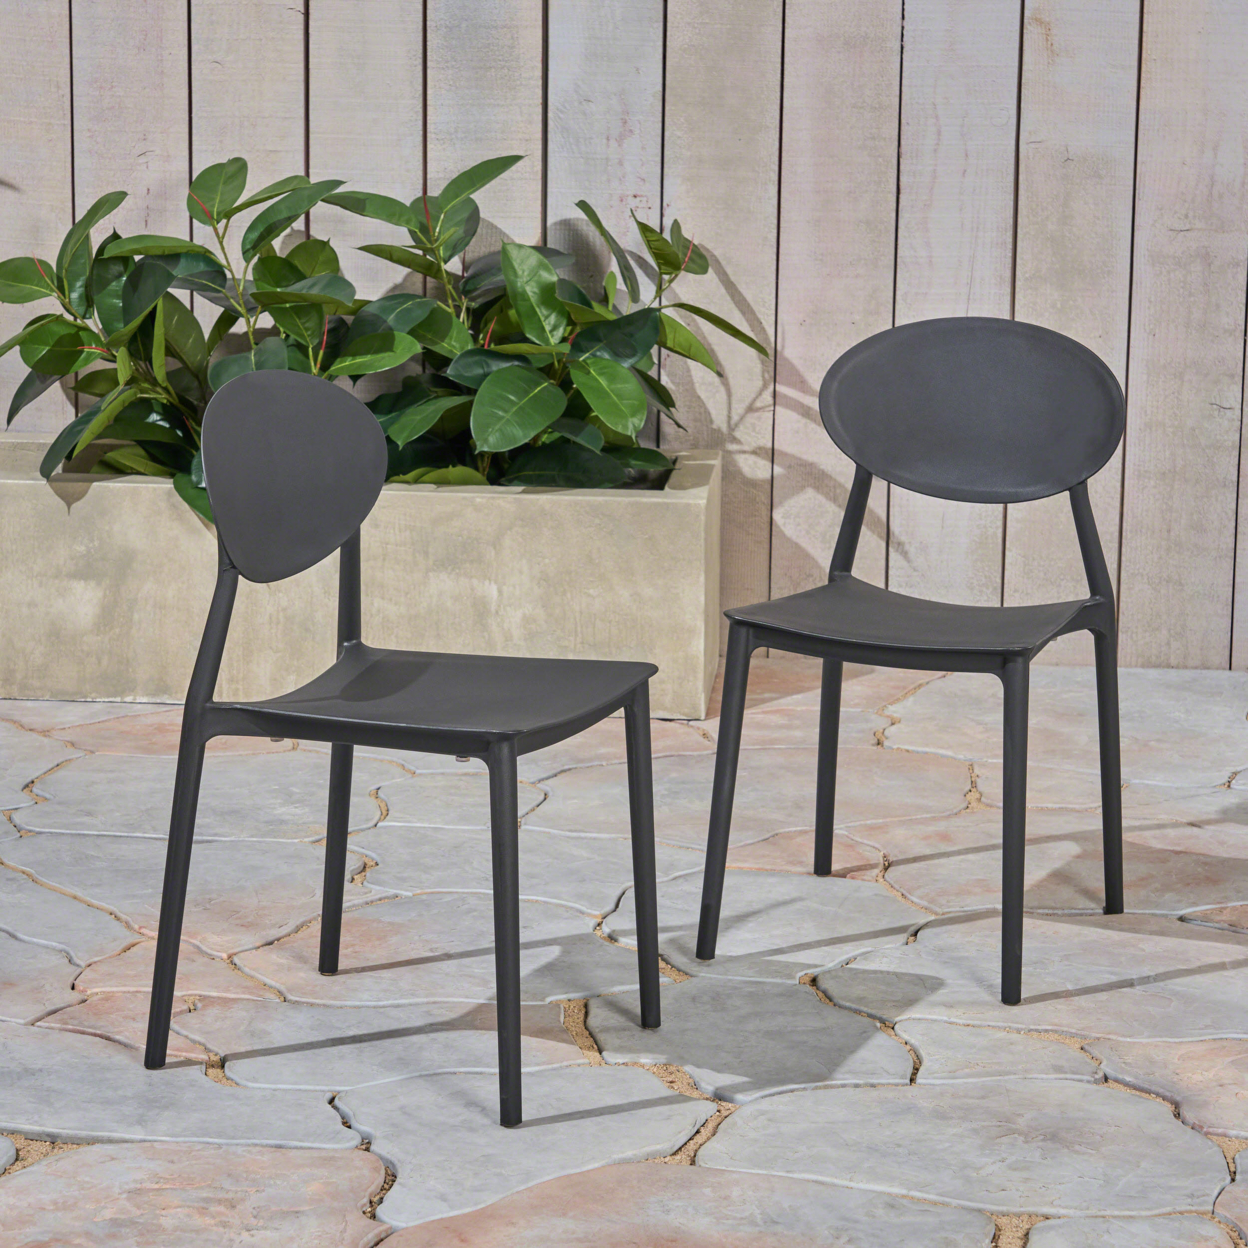 Brynn Outdoor Plastic Chairs (Set Of 2) - White, Set Of 4